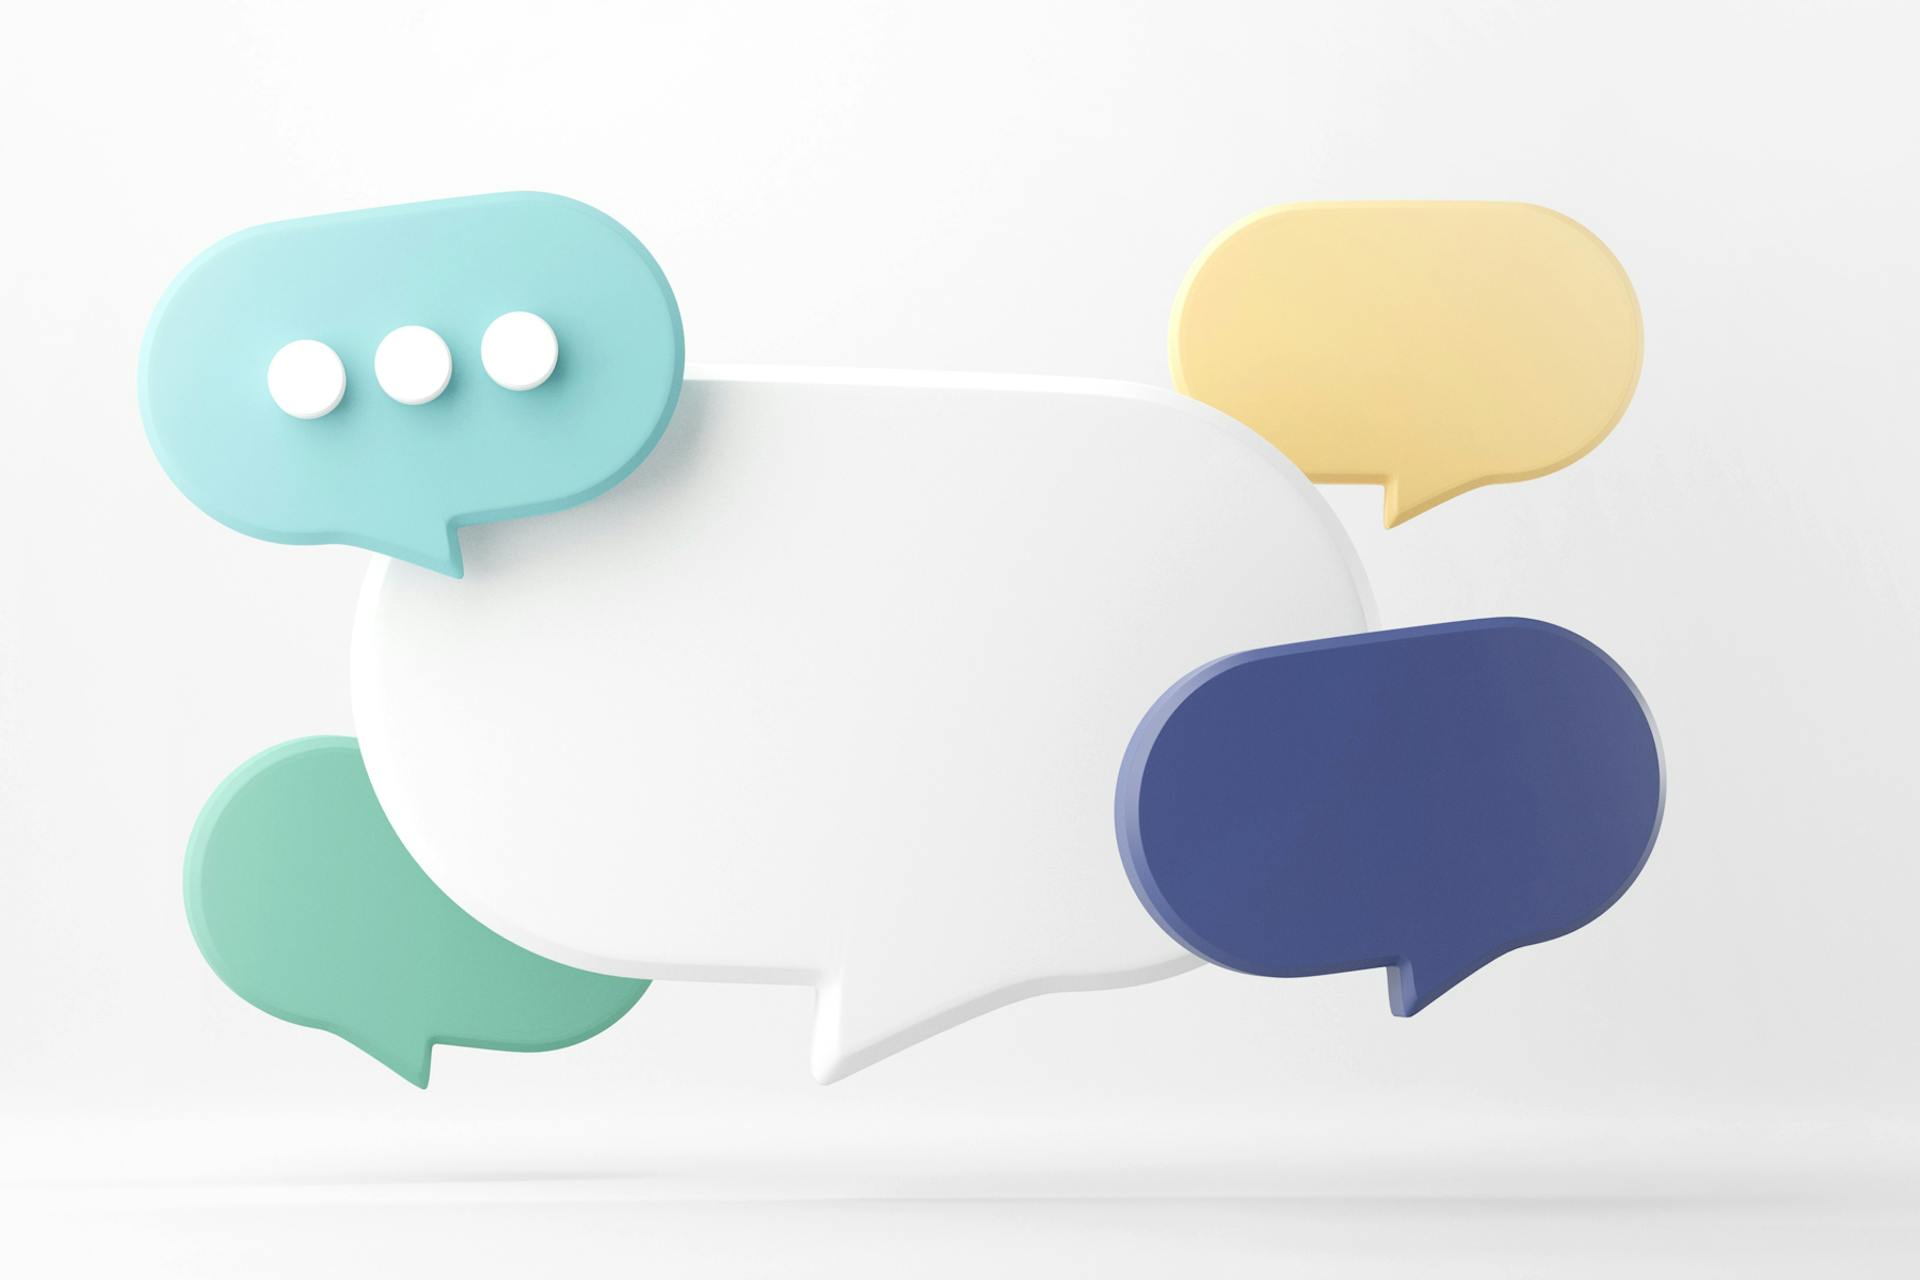 Image showing speech bubble surrounded by smaller speech bubbles in different colors. Blog post detailing what employees should never share on social media